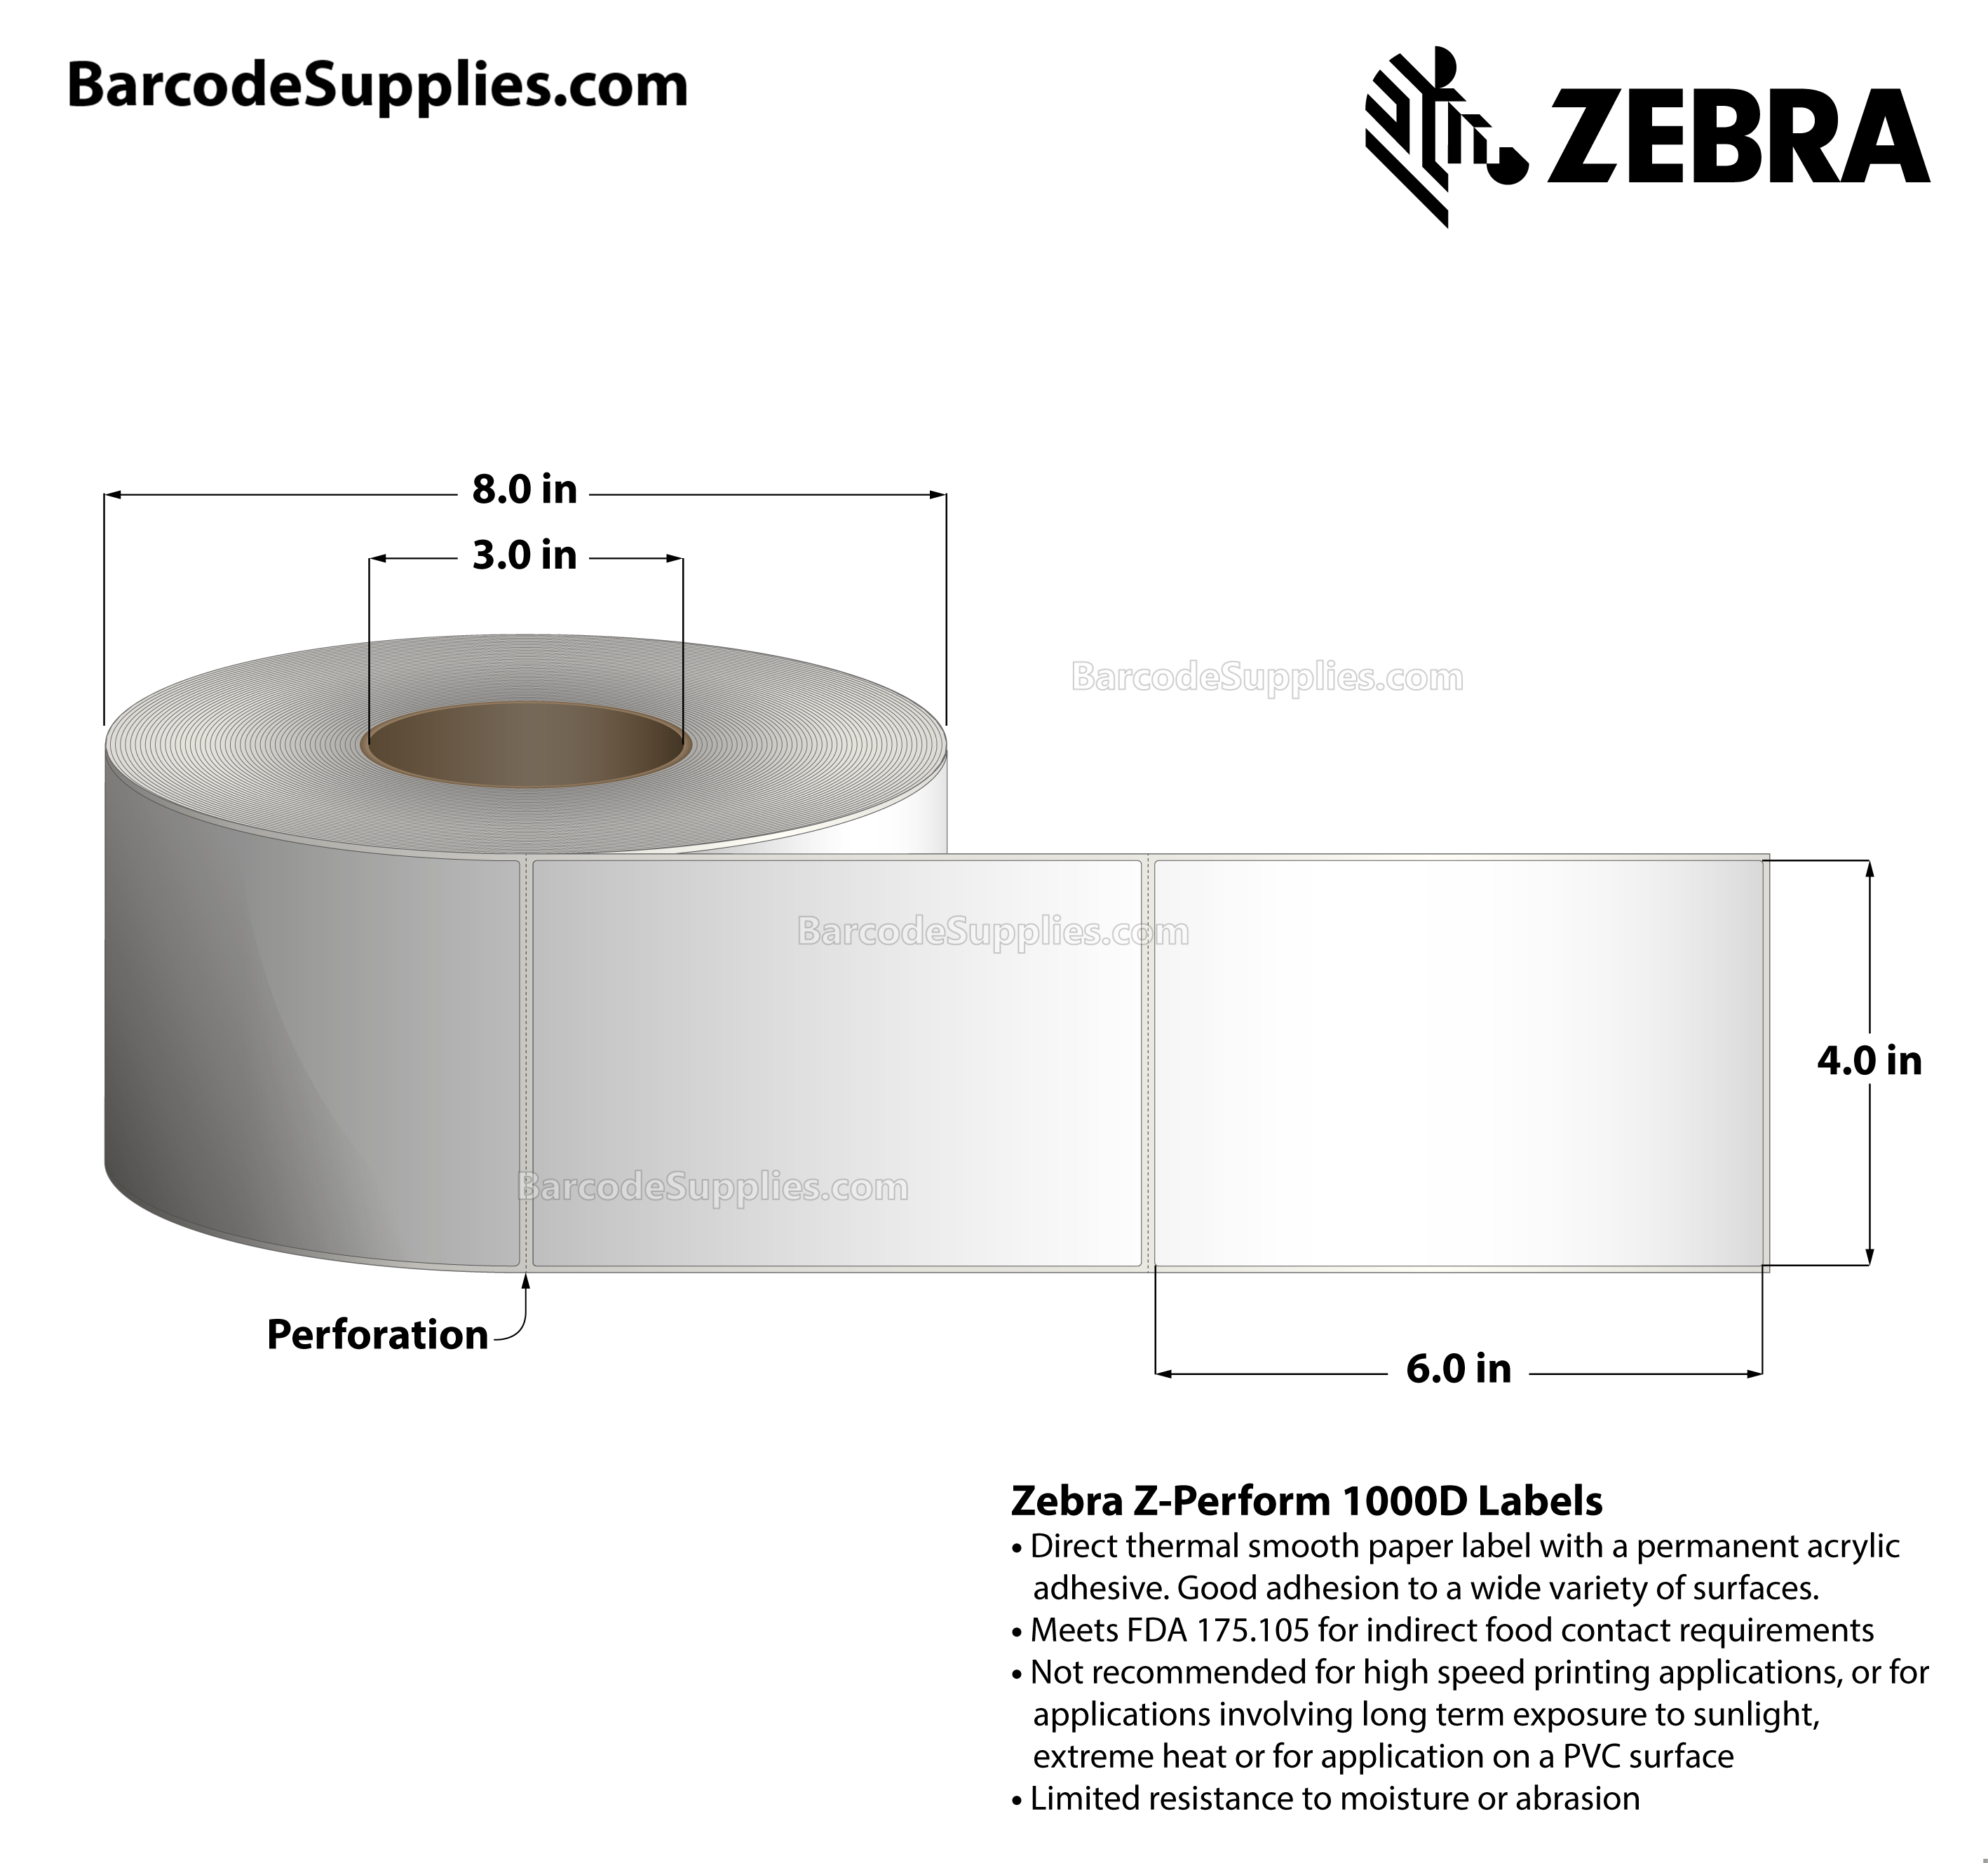 4 x 6 Direct Thermal White Z-Perform 1000D Labels With Permanent Adhesive - Perforated - 1000 Labels Per Roll - Carton Of 4 Rolls - 4000 Labels Total - MPN: 10000301